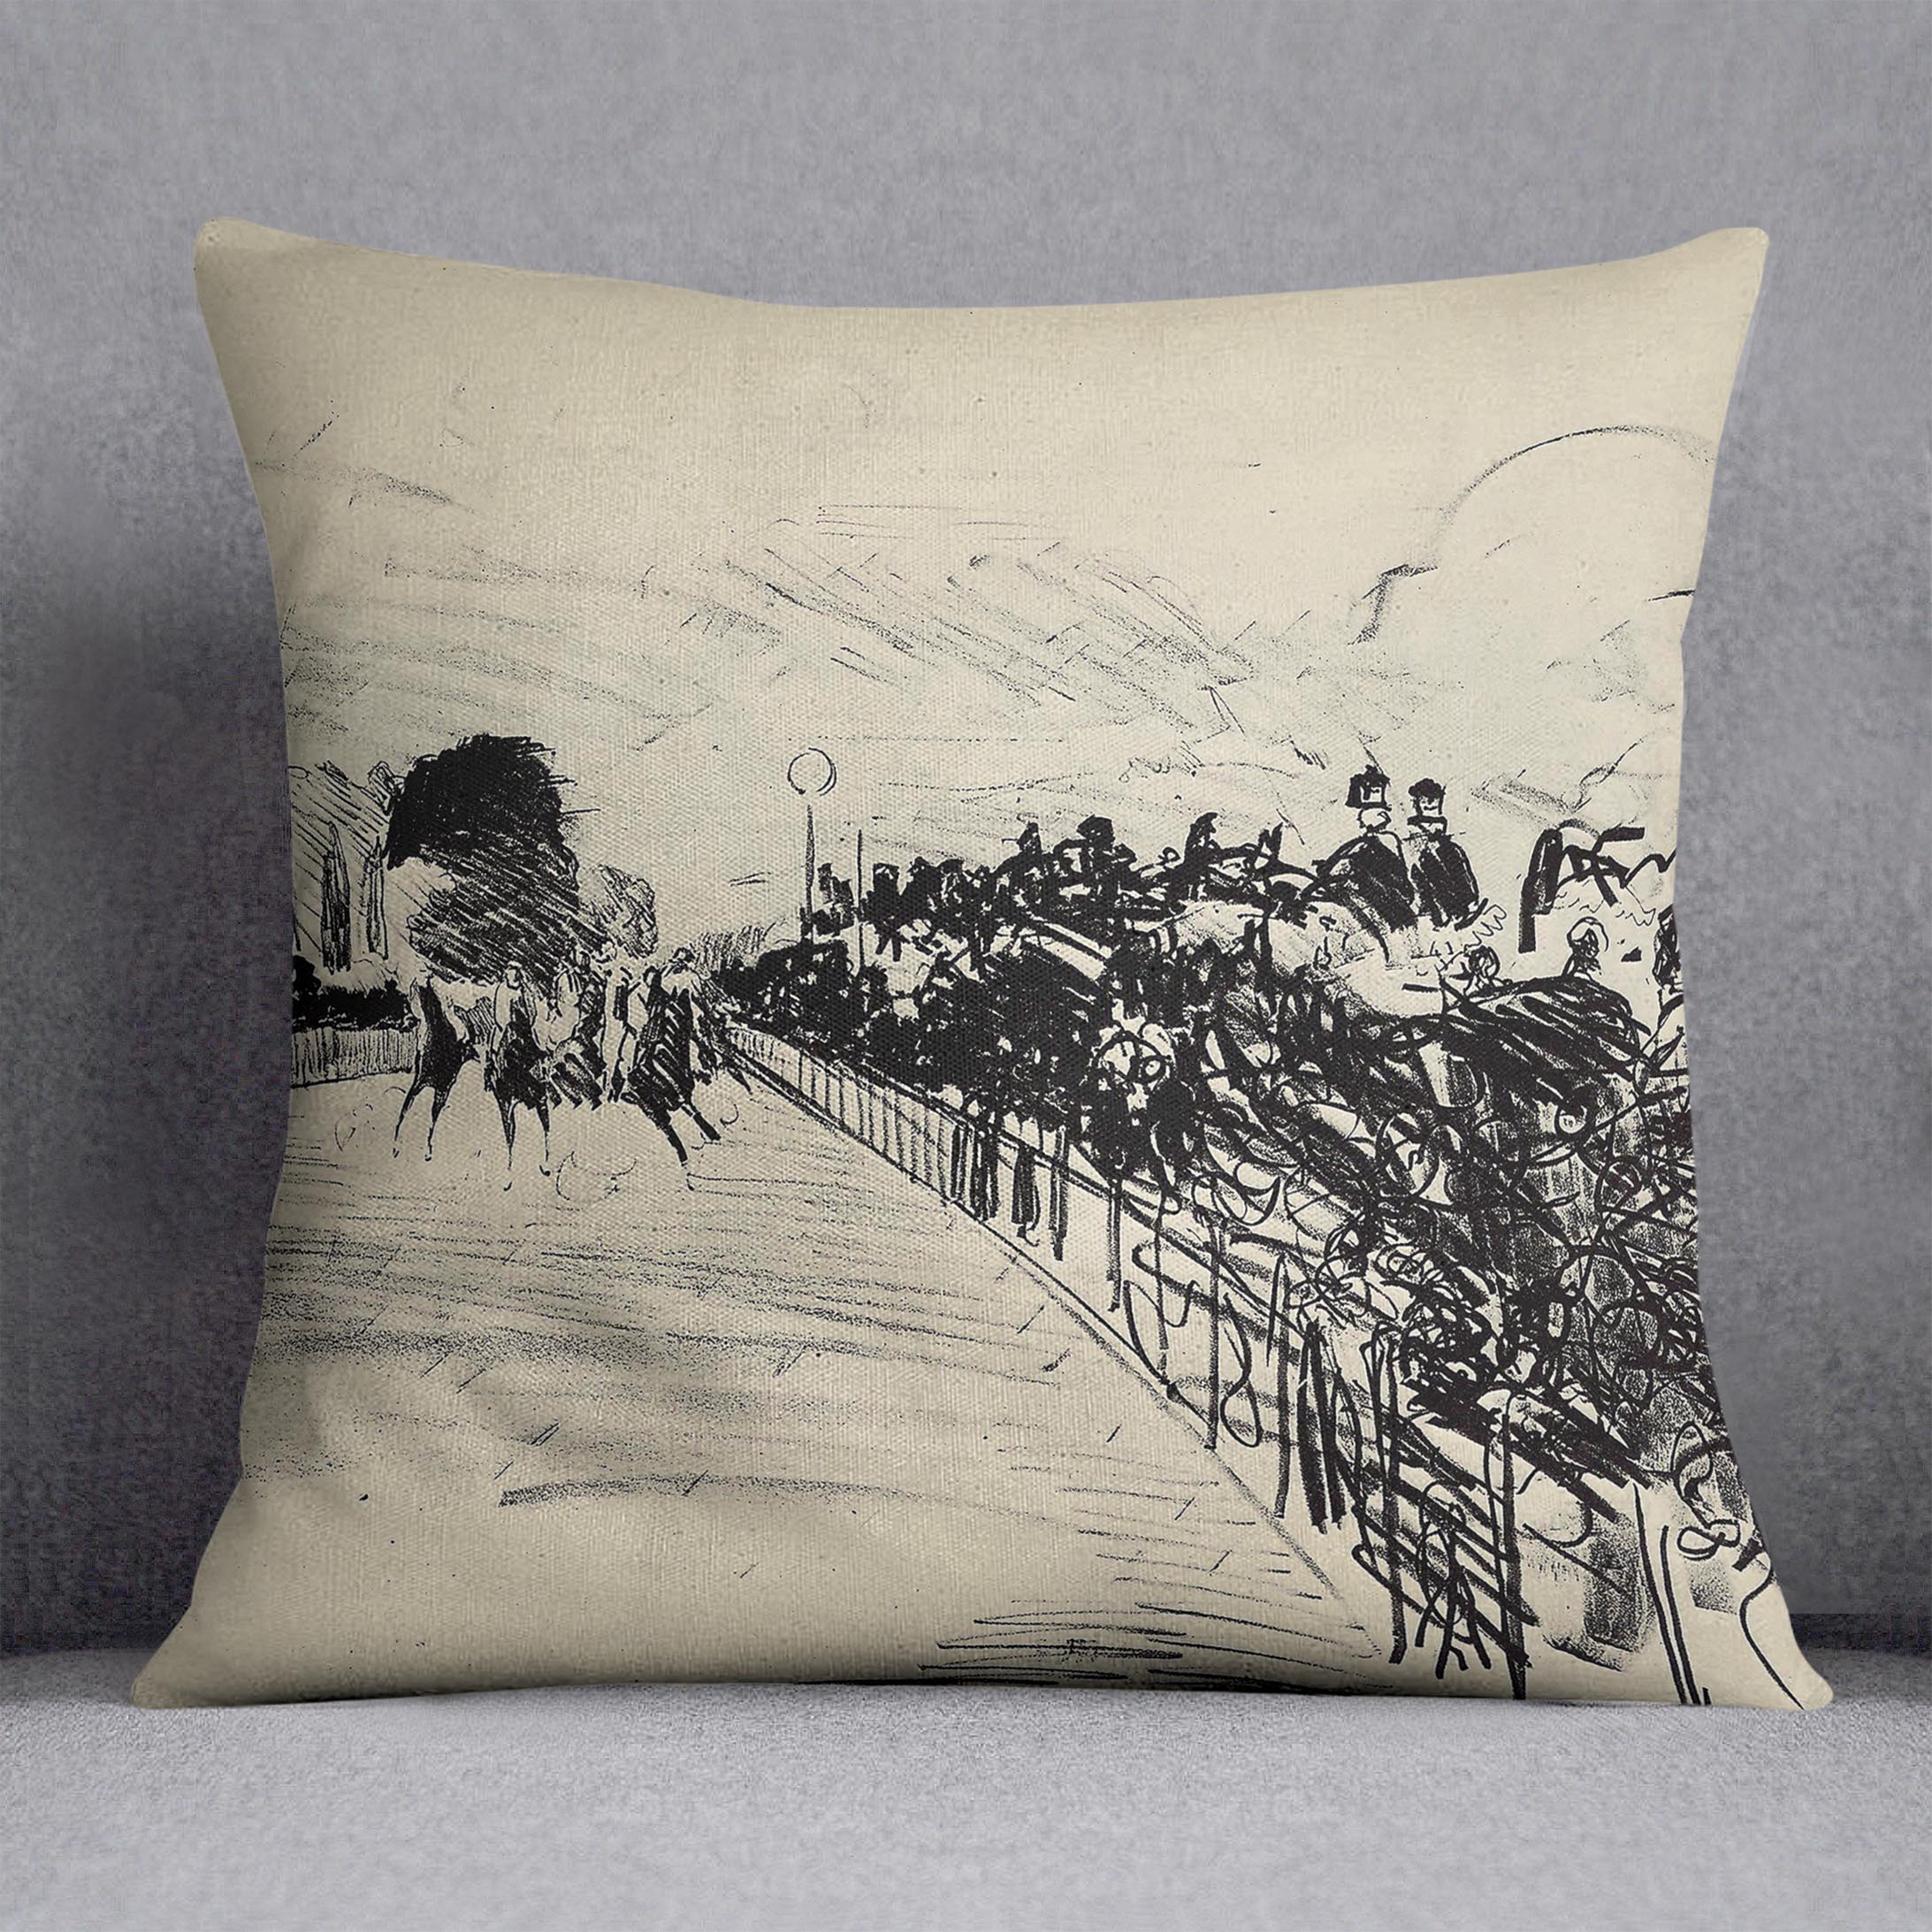 Horse racing by Manet Cushion